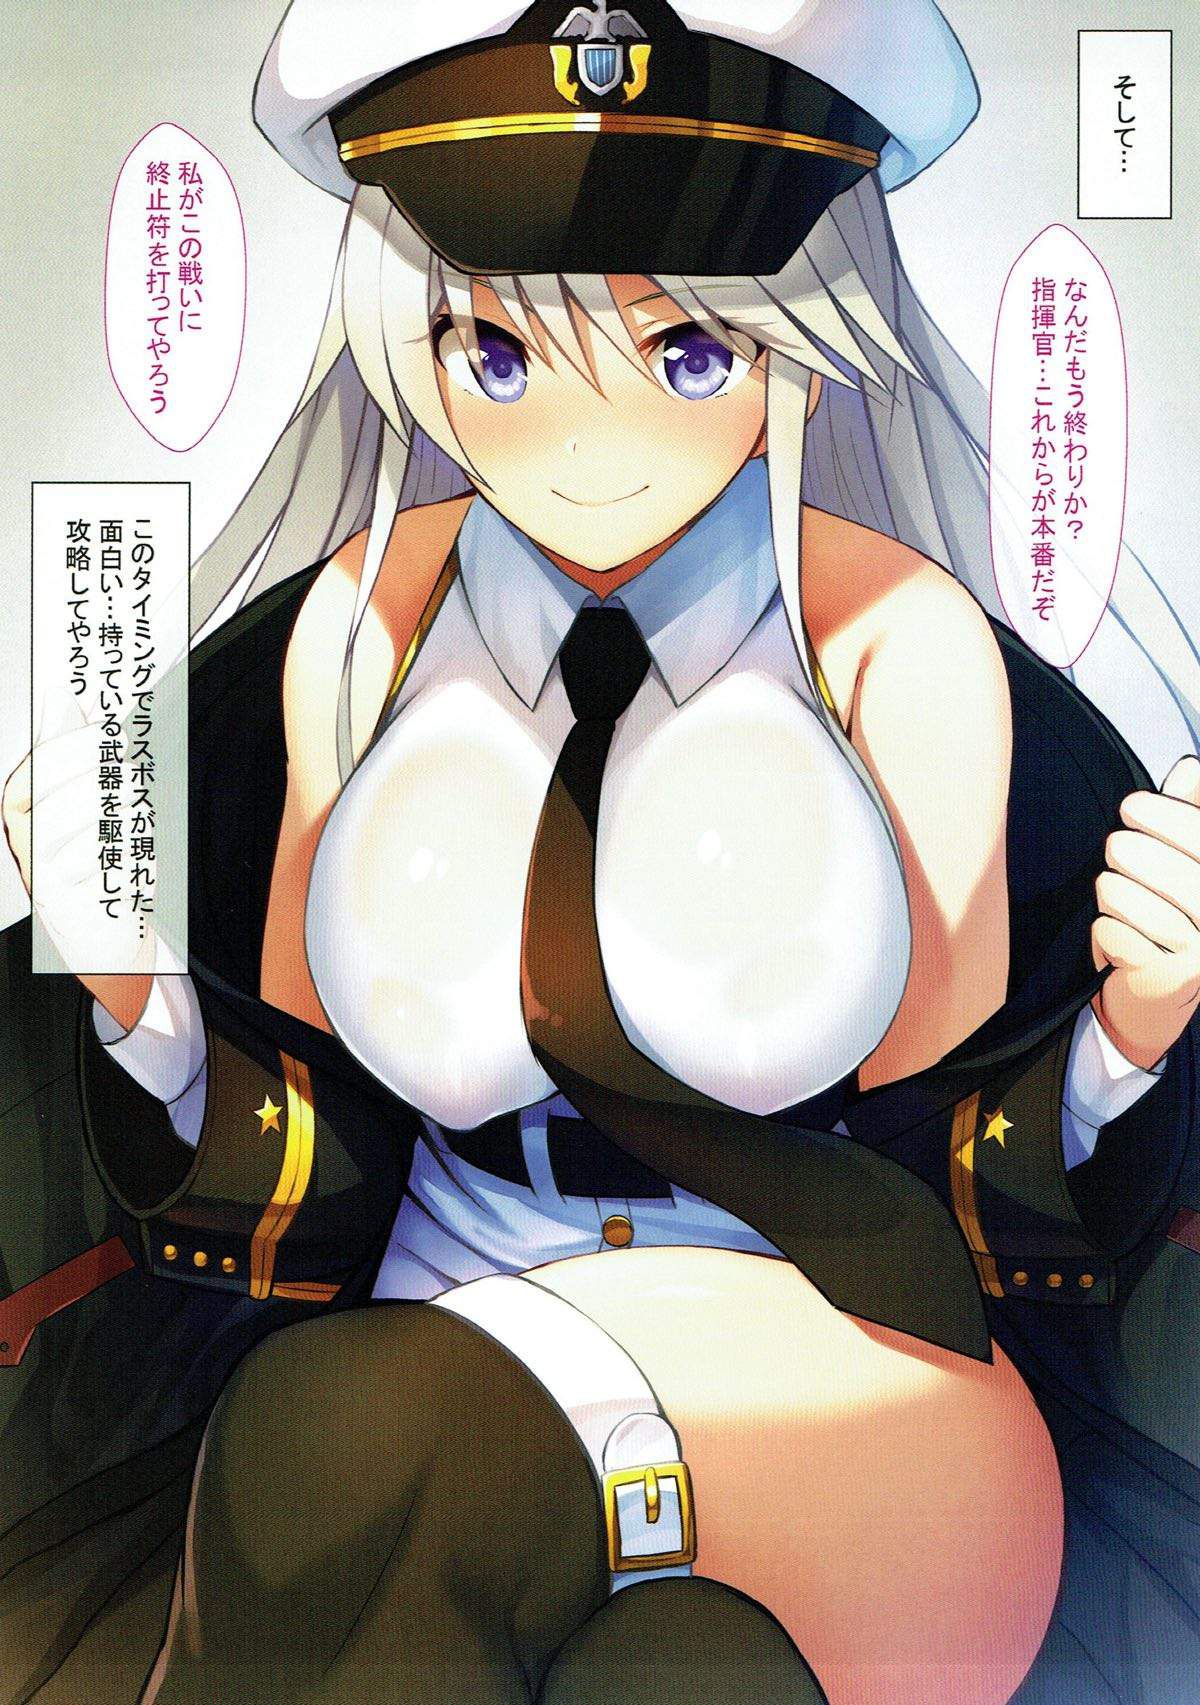 Gather people who want to see the erotic images of Azur Lane! 13